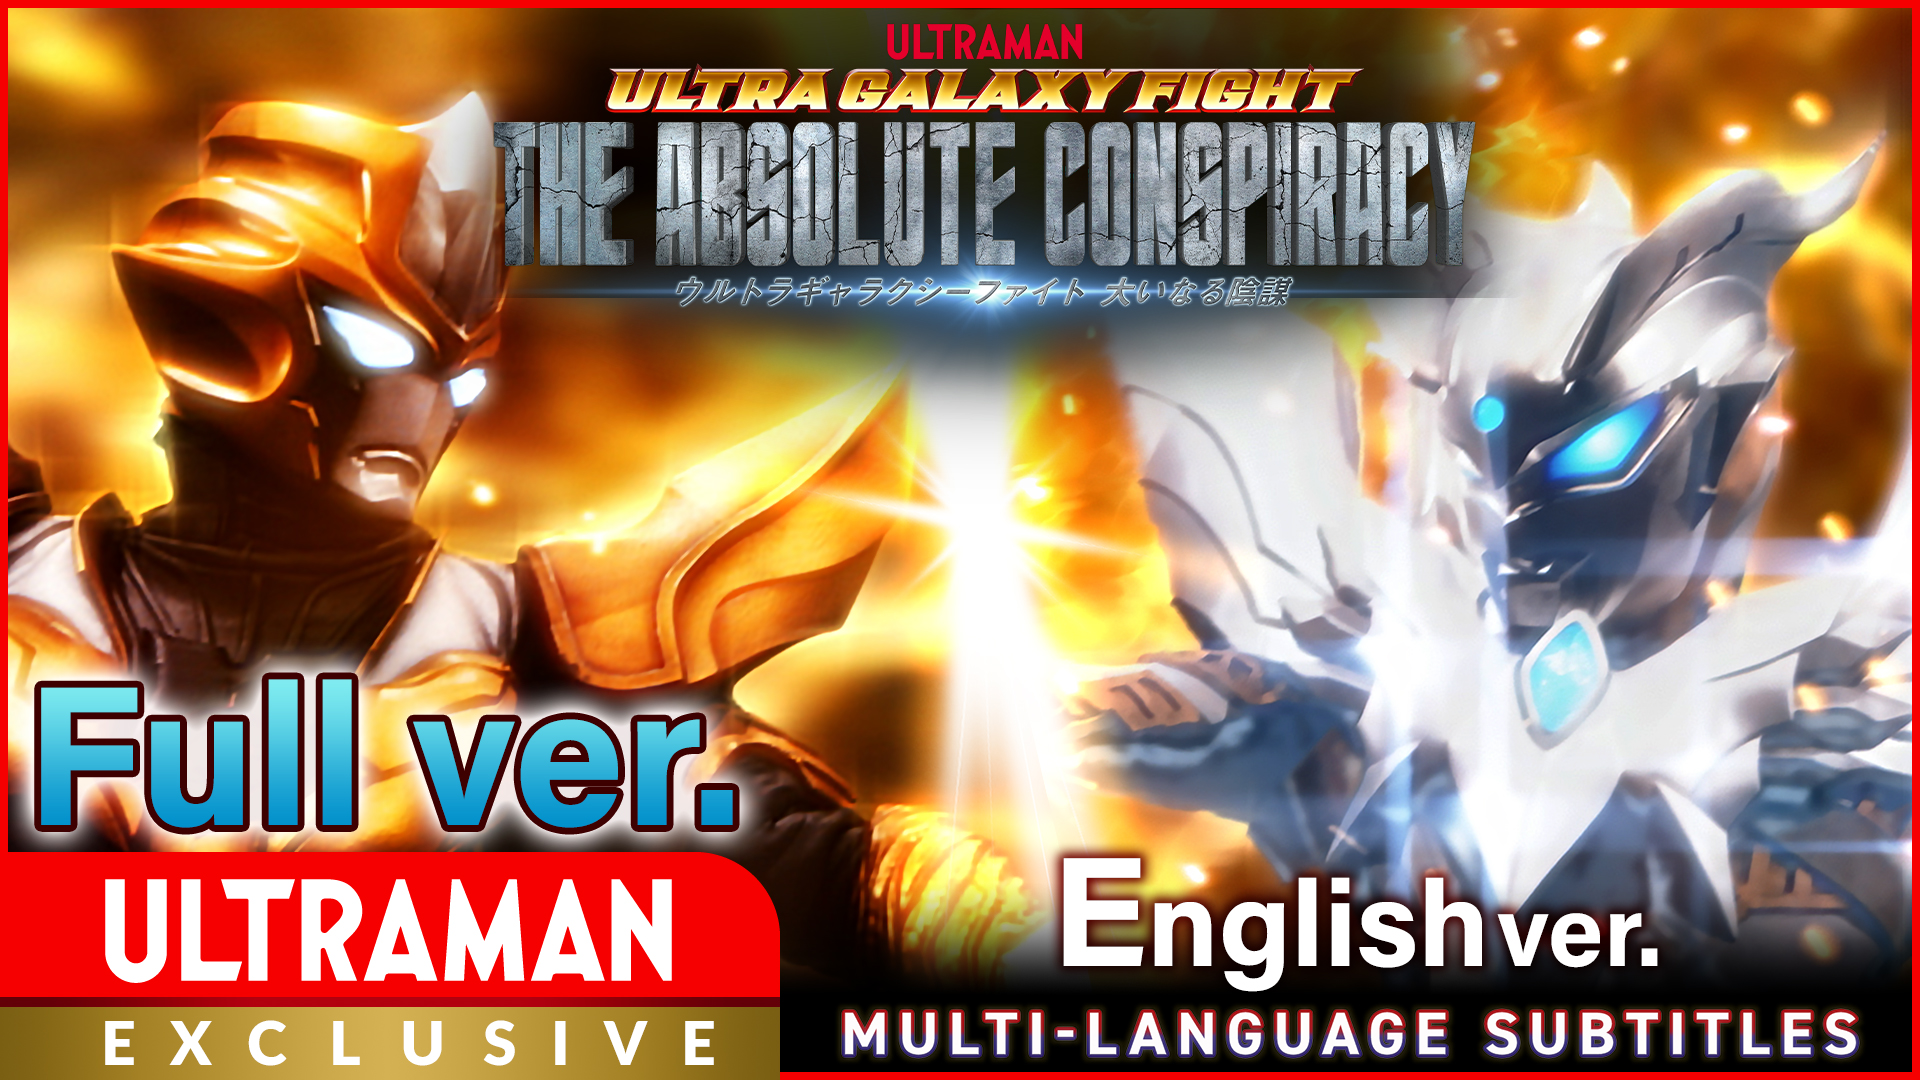  ULTRA GALAXY FIGHT:THE ABSOLUTE CONSPIRACY Full episode ver. ...